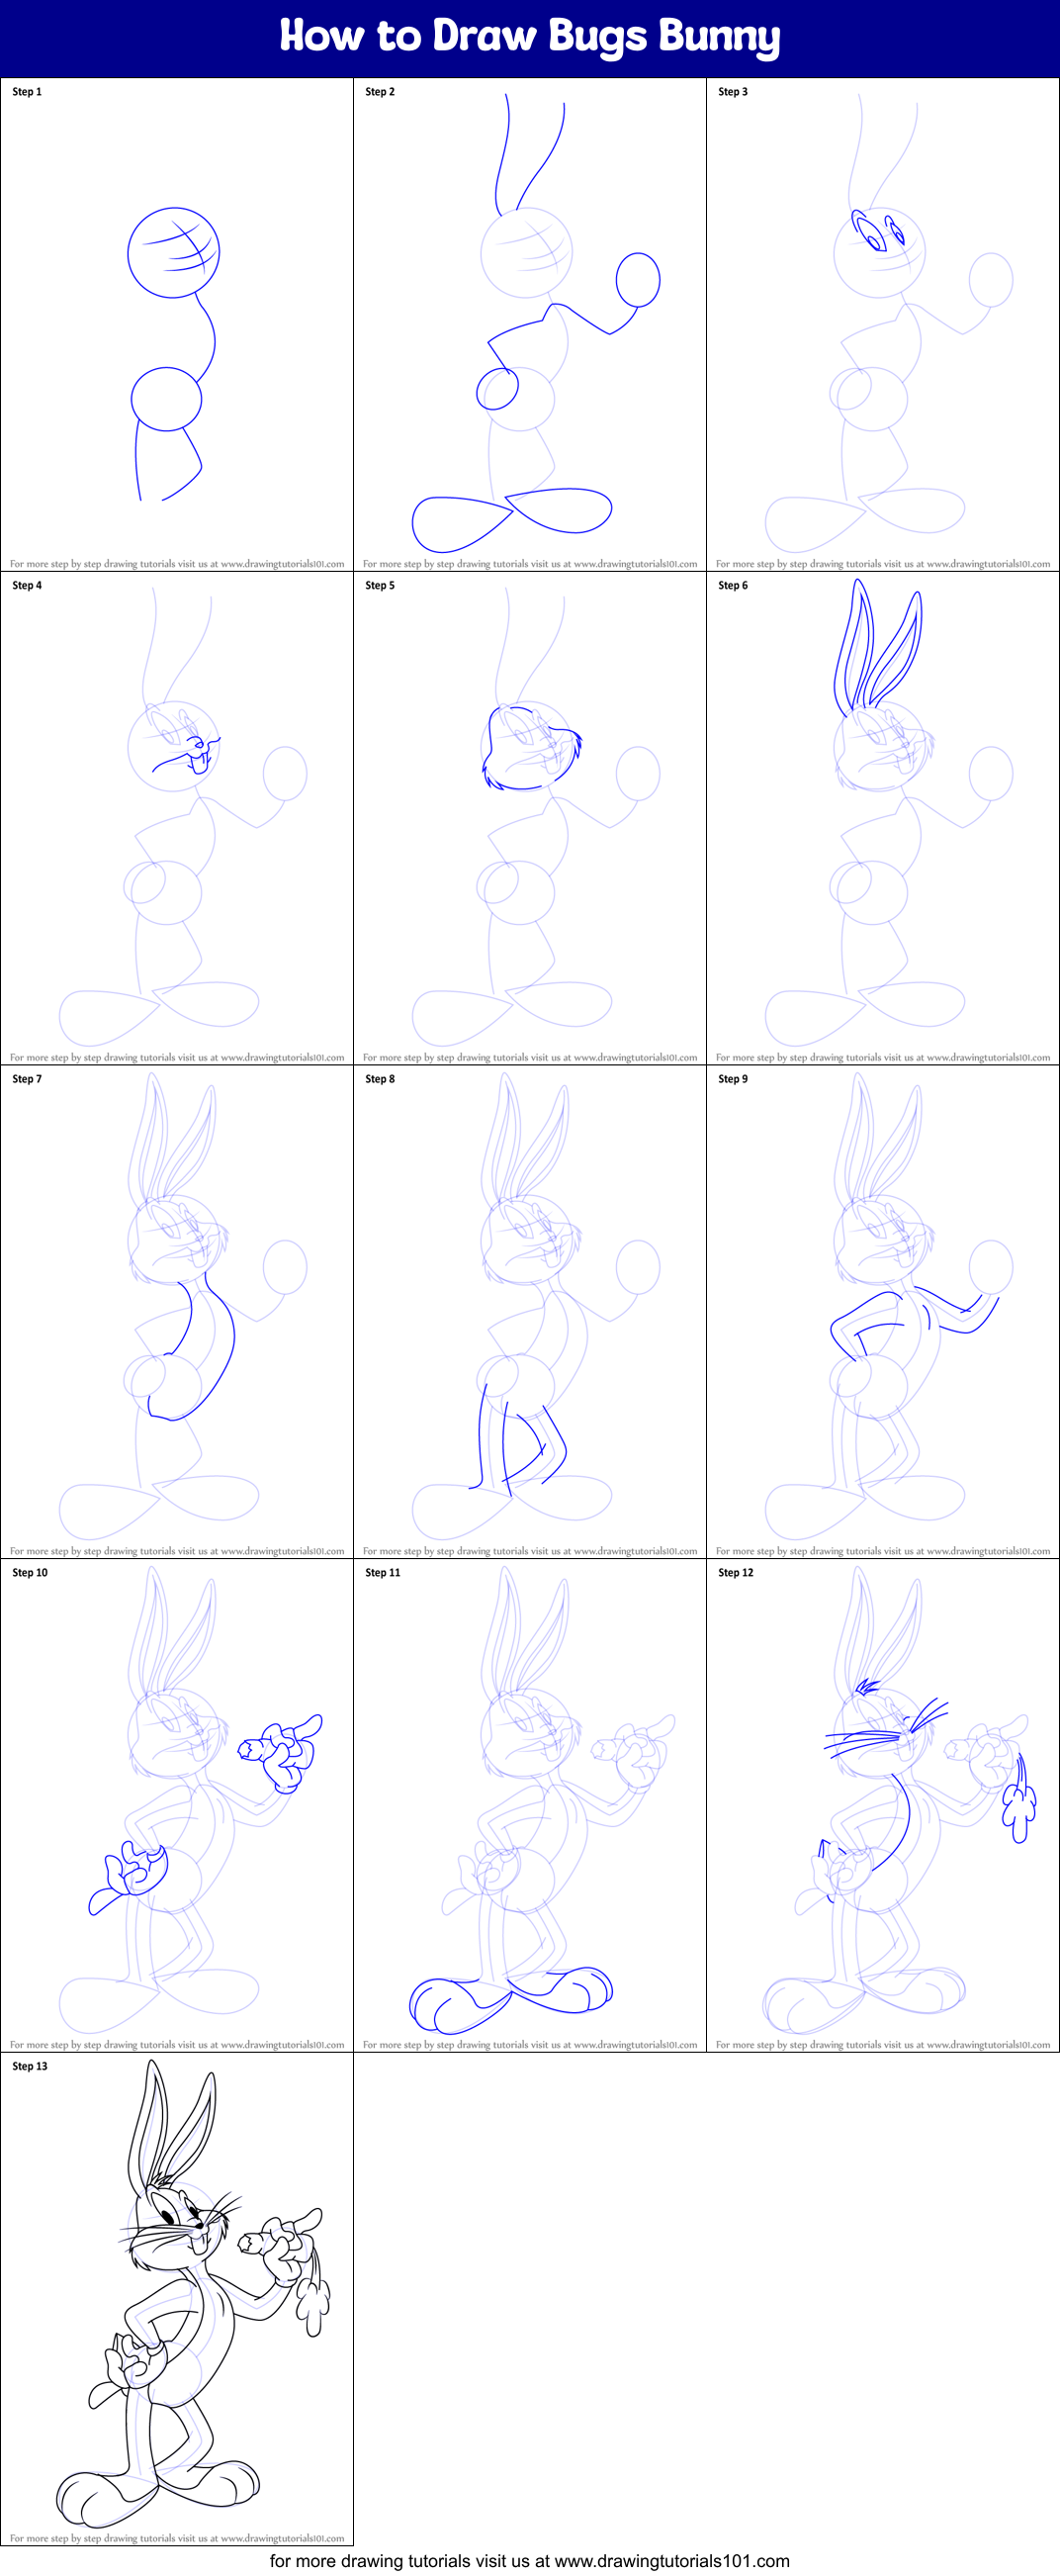 How to Draw Bugs Bunny printable step by step drawing sheet